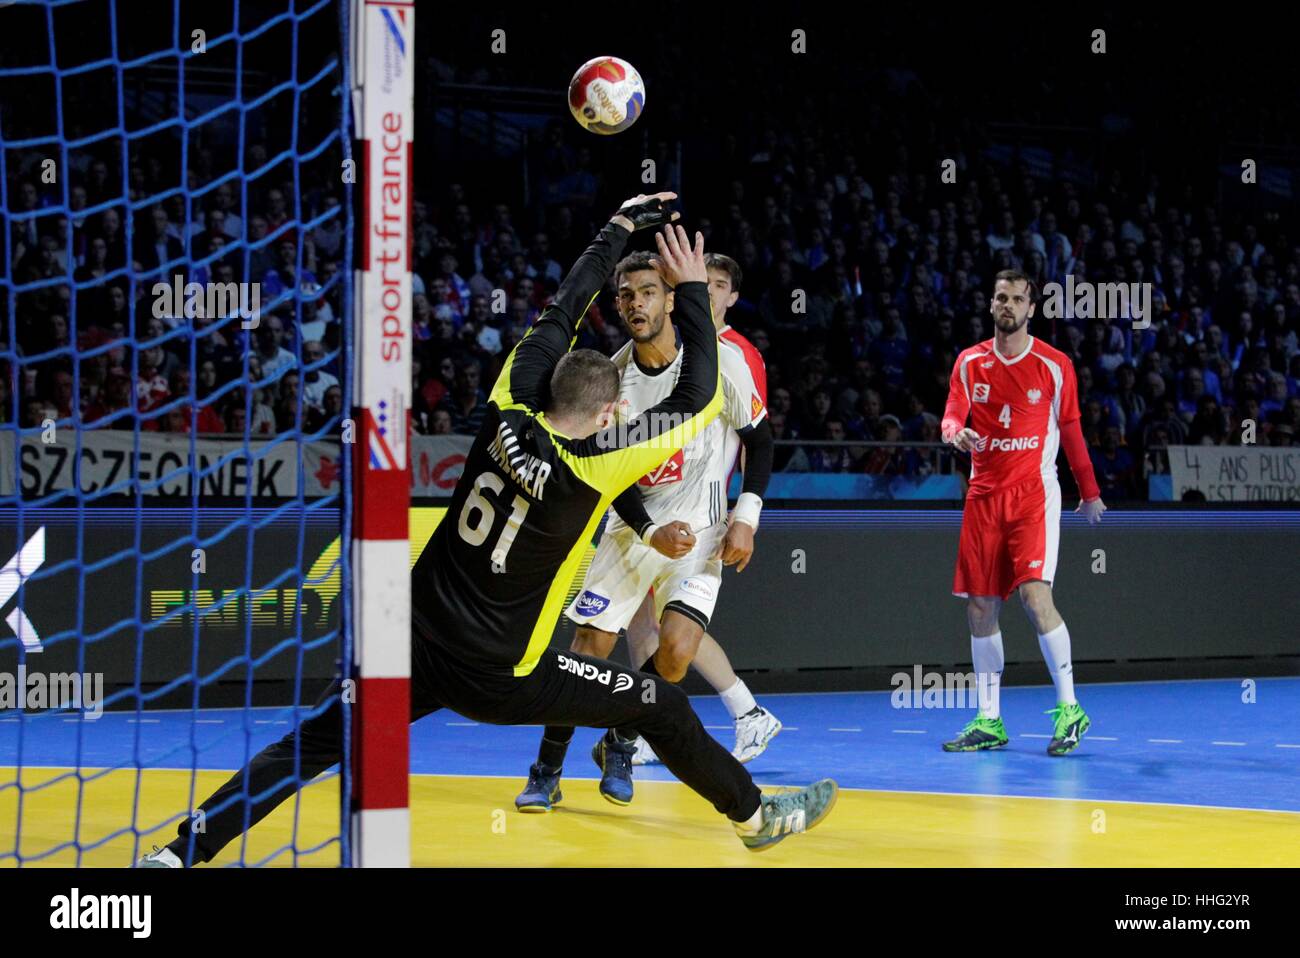 Parc Exposition XXL, Nantes, France. 19th Jan, 2017. 25th World Handball Championships France versus Poland. Adrien Dipanda France in shooting action Credit: Laurent Lairys/Agence Locevaphotos/Alamy Live News Stock Photo